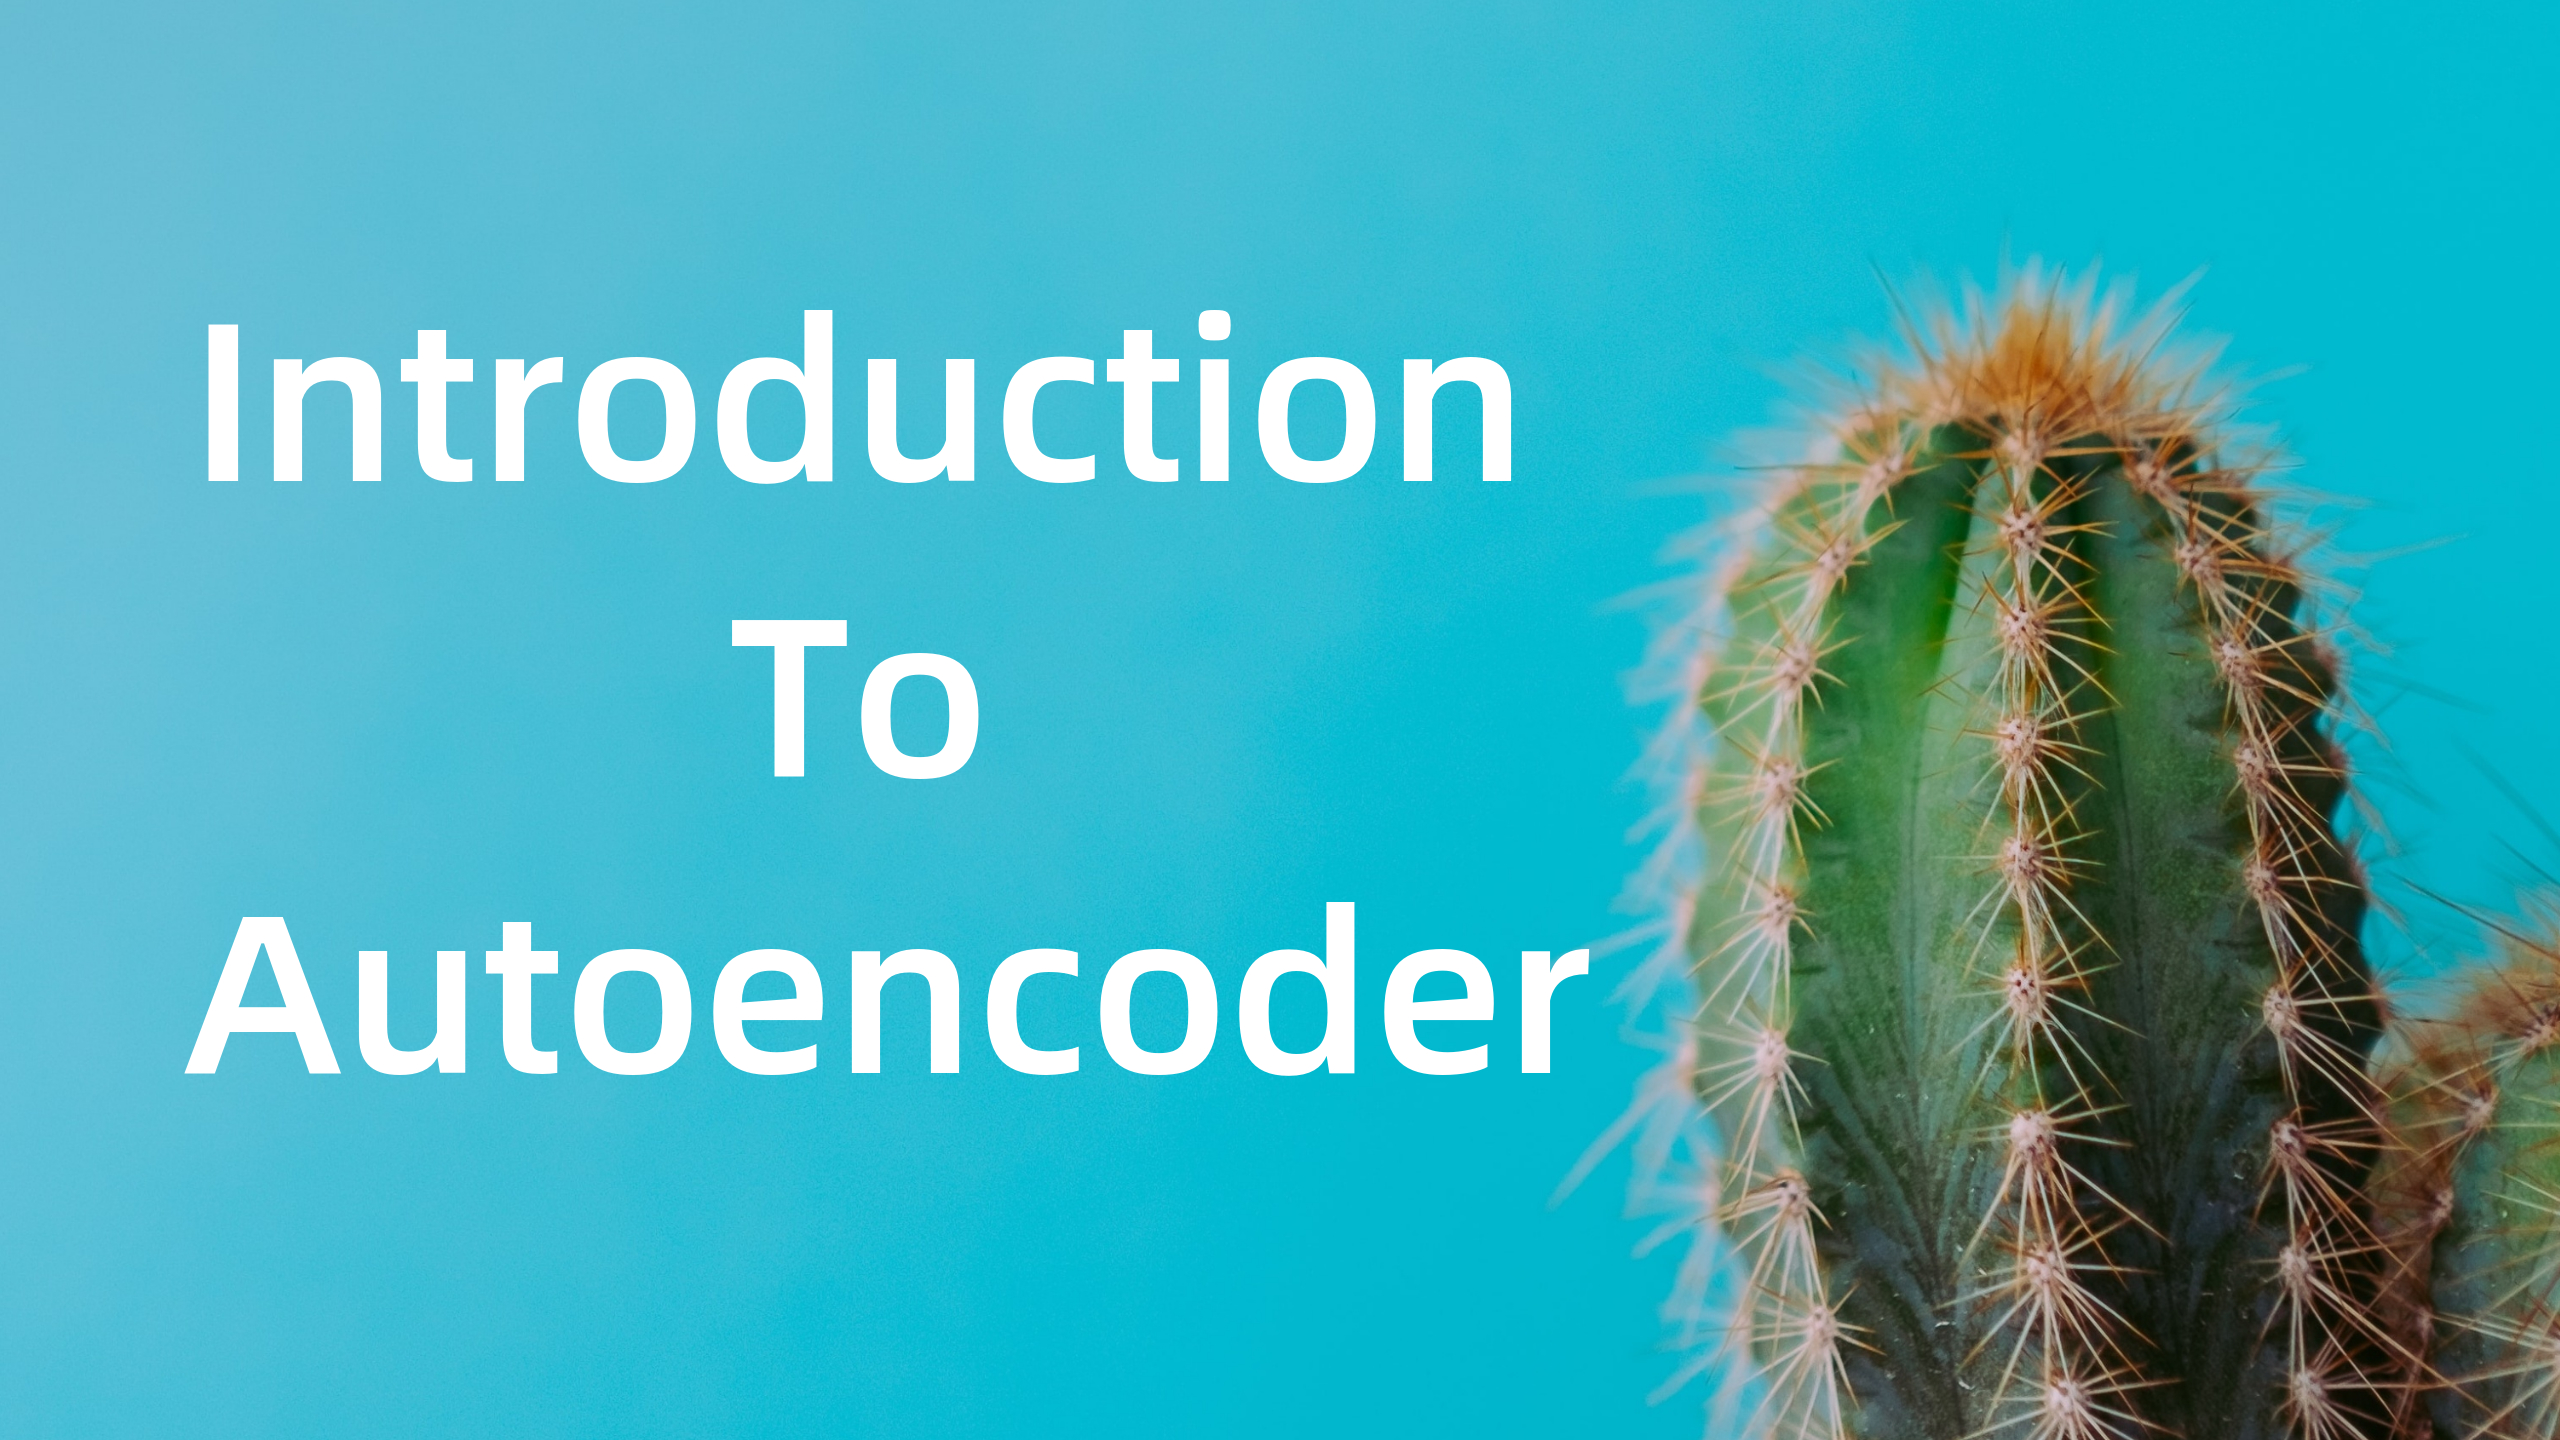 Introduction to Autoencoders